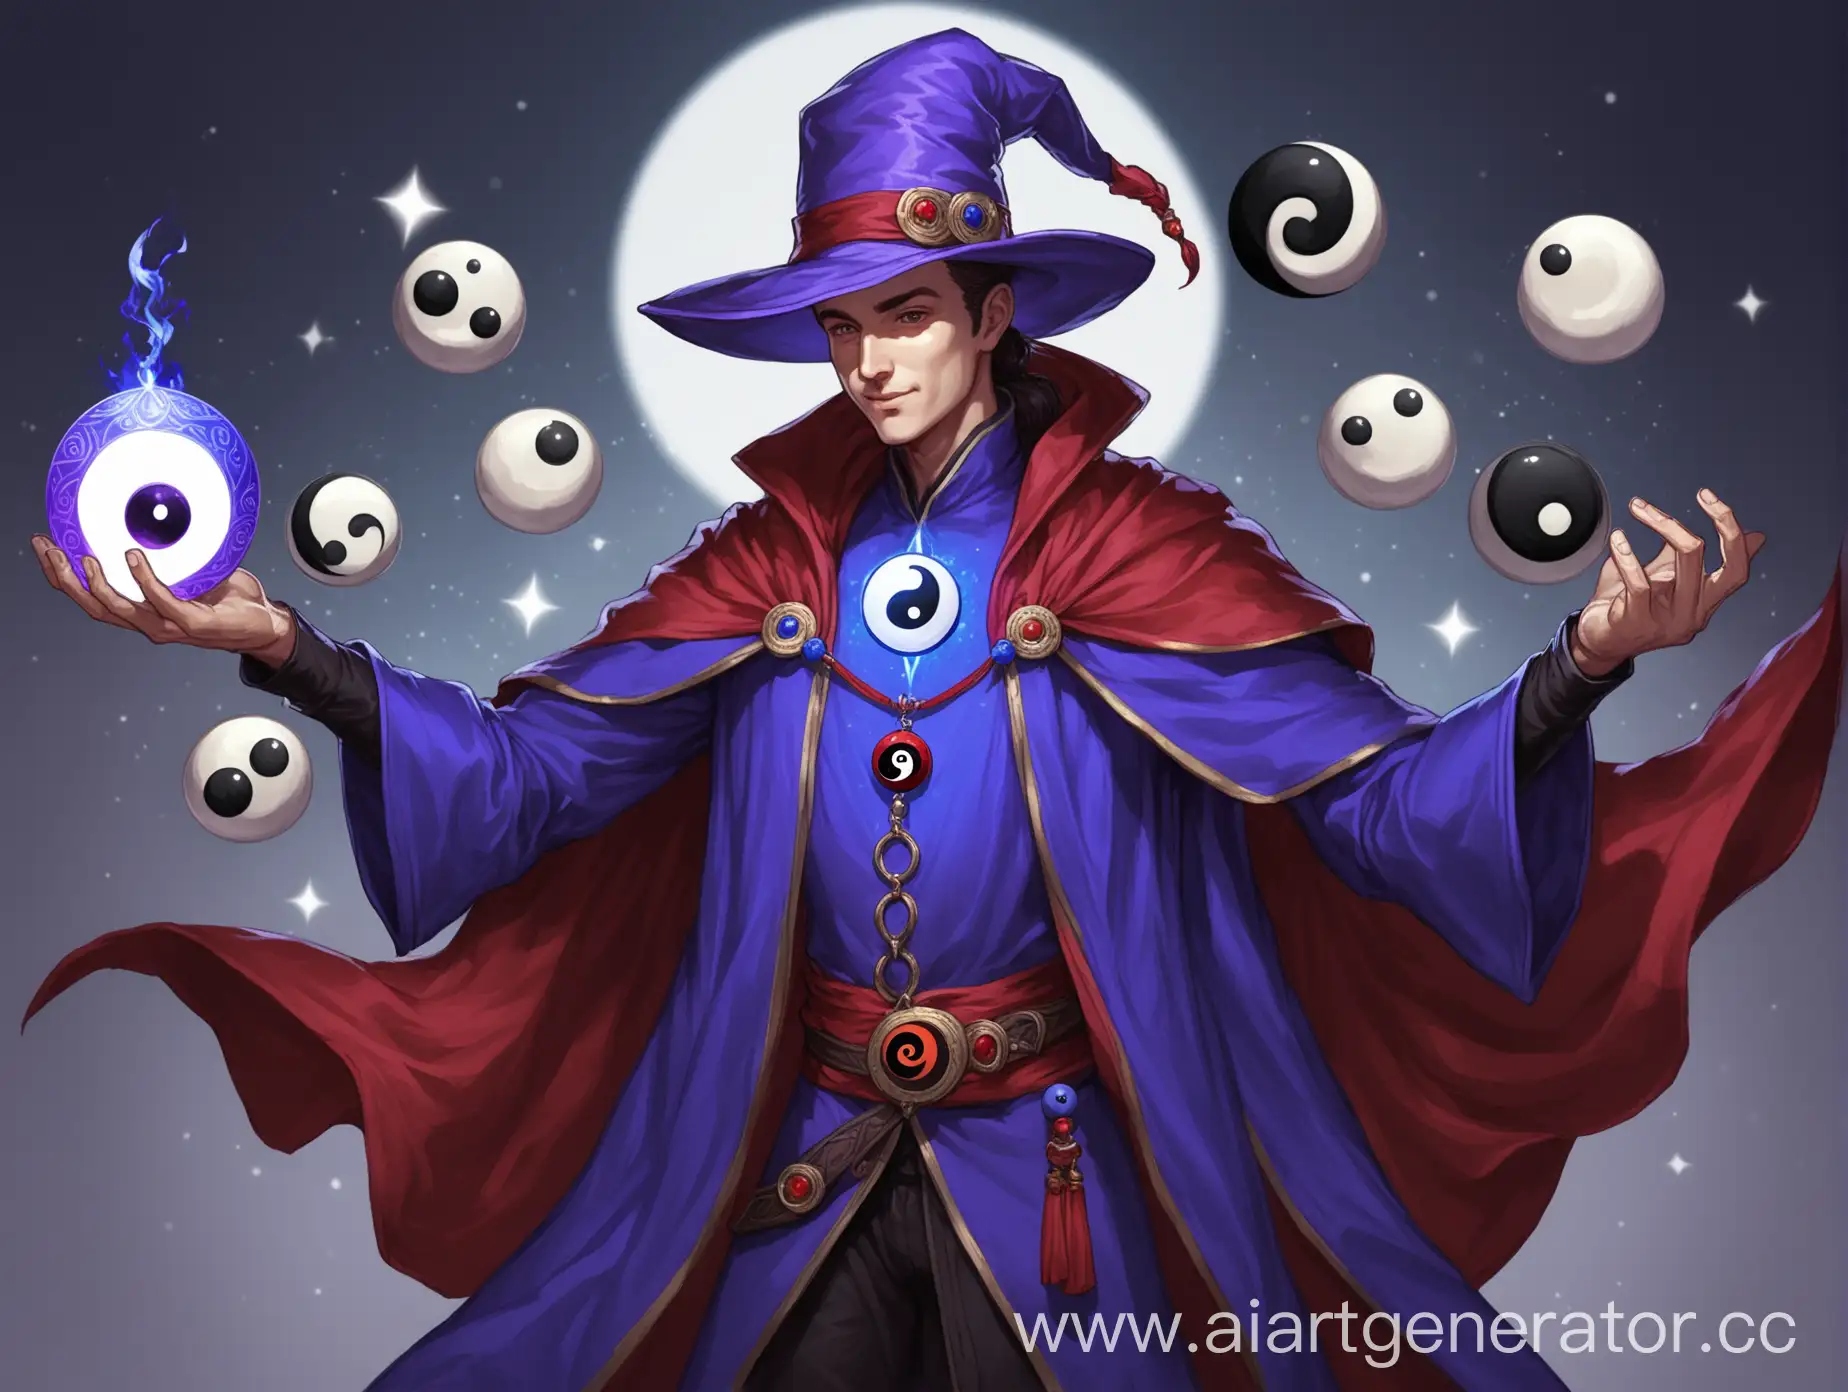 Mysterious-Male-Magician-in-Purple-Hat-and-Cloak-with-YinYang-Amulet